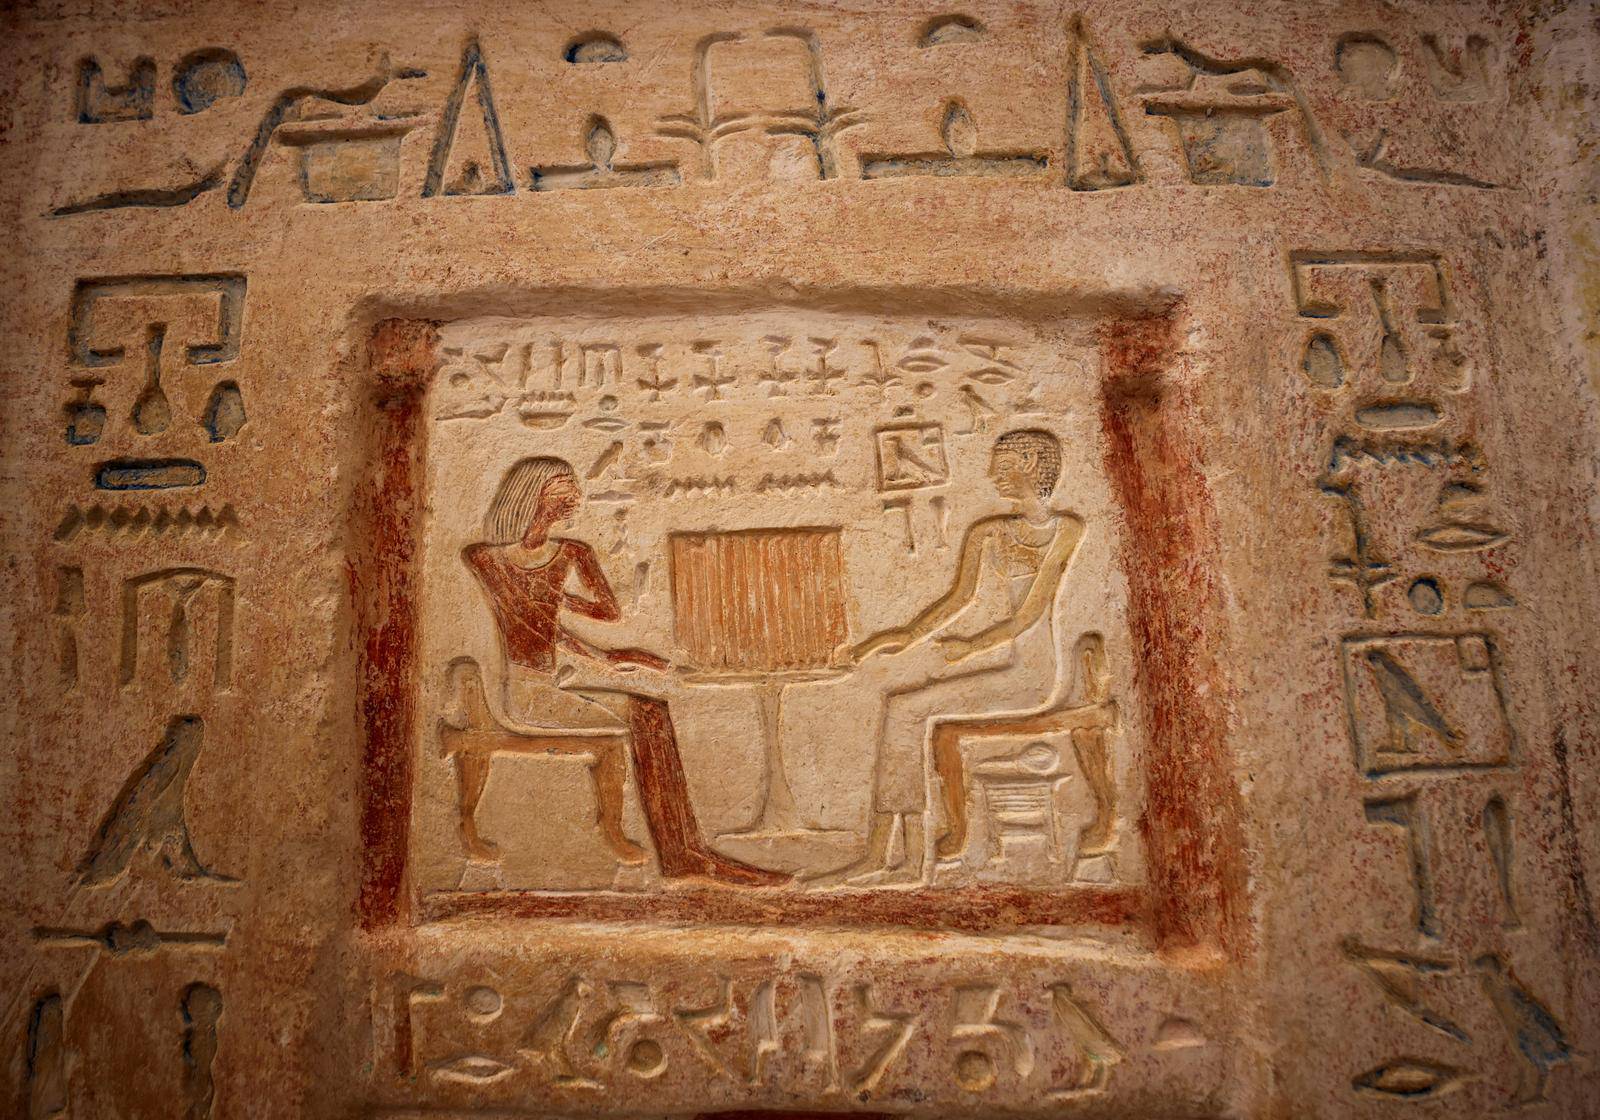 An artifact displayed after the announcement of 4,300-year-old sealed tombs discovered in Egypt's Saqqara necropolis, in Giza